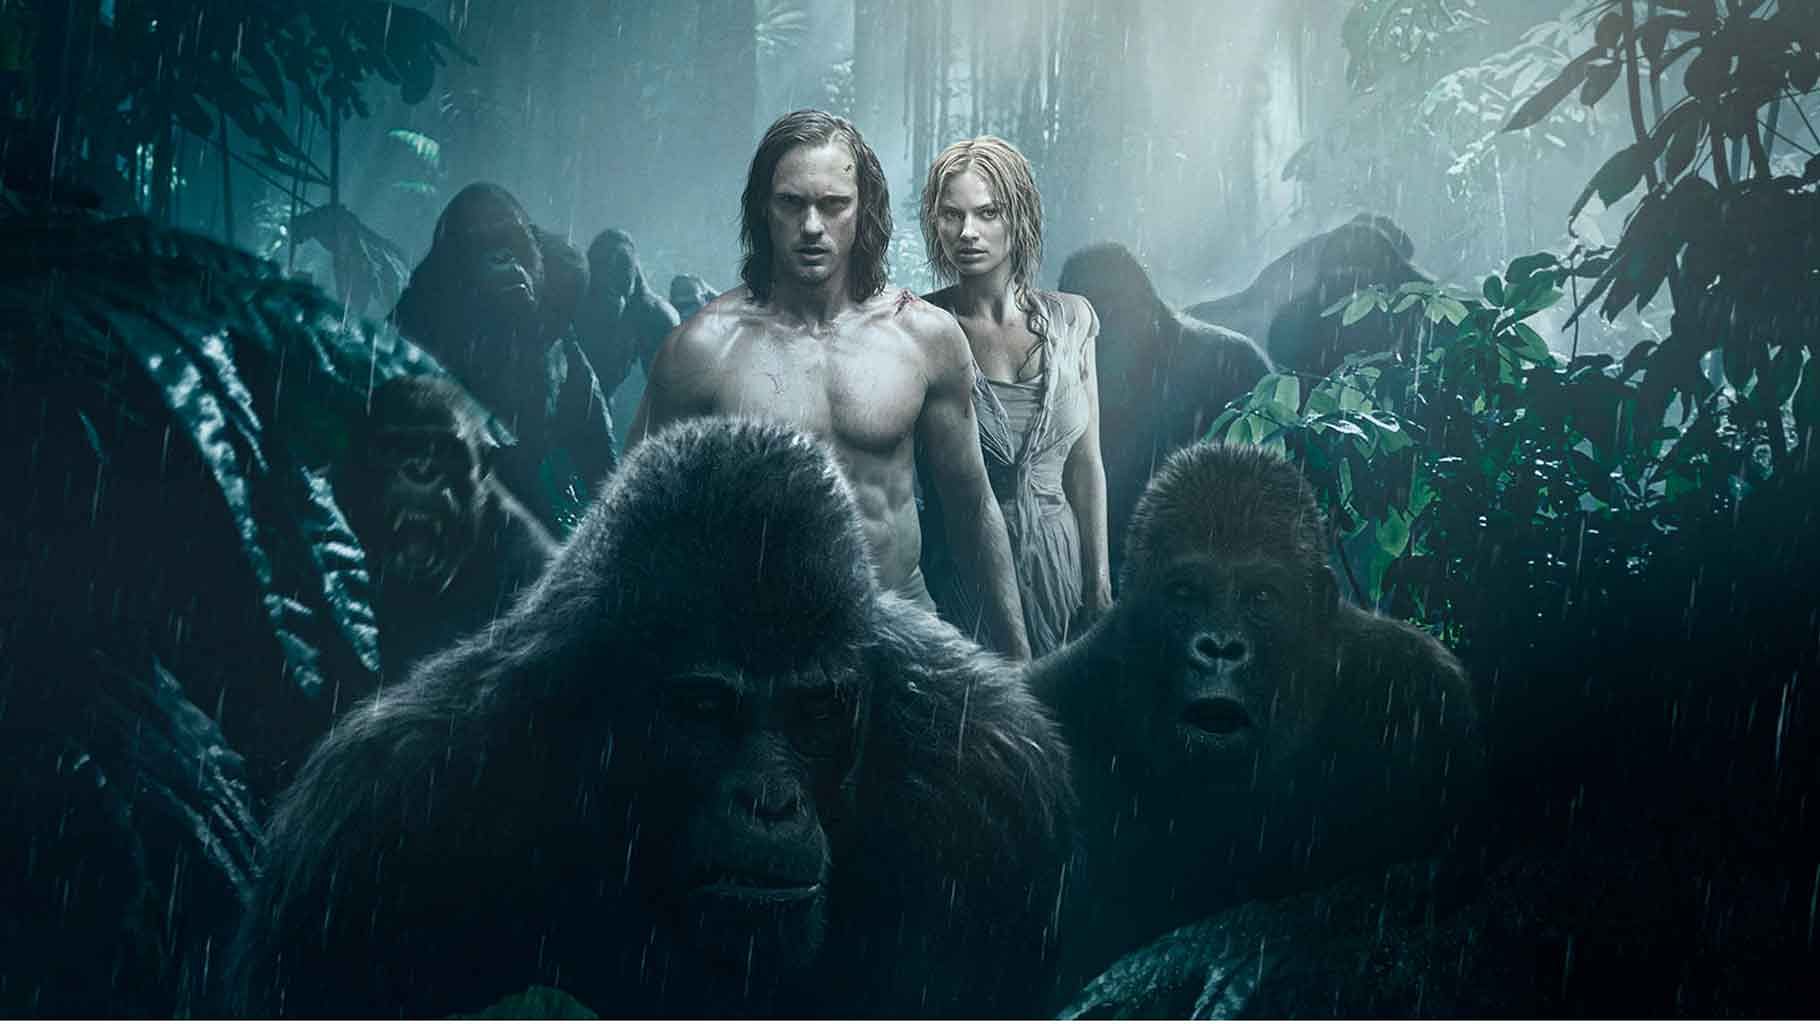 The movie fails to find it’s purpose and maintain the iconic character of Tarzan. (Photo Courtesy:<a href="http://http://wbpsites.com/tarzanadventure/us/tumblr/assets/images/backgrounds/art-v3-background.jpg"> legendoftarzan.com)</a>